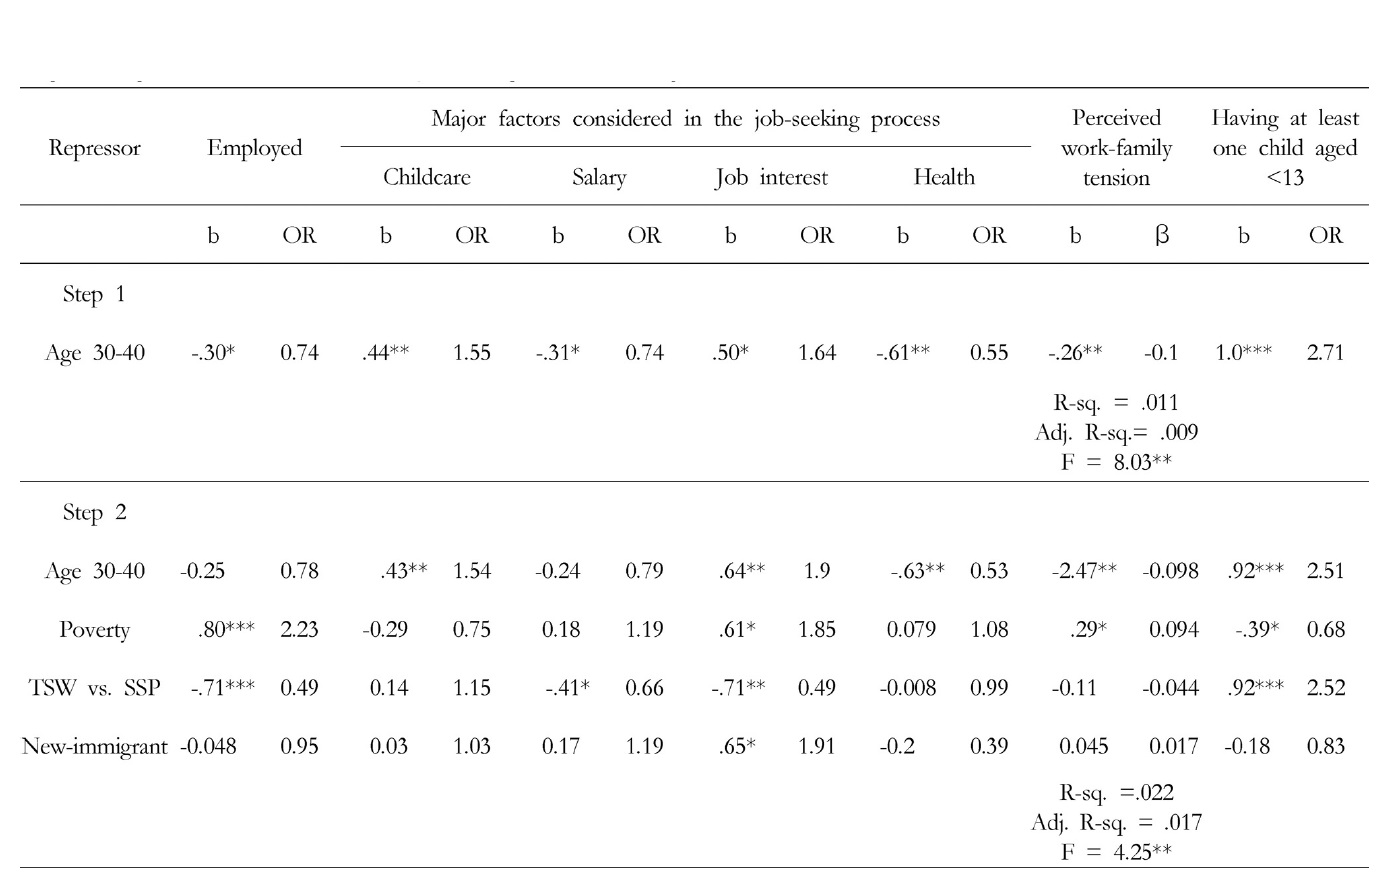 Logistic regressions coeffucients for prediciting of work-family conditions